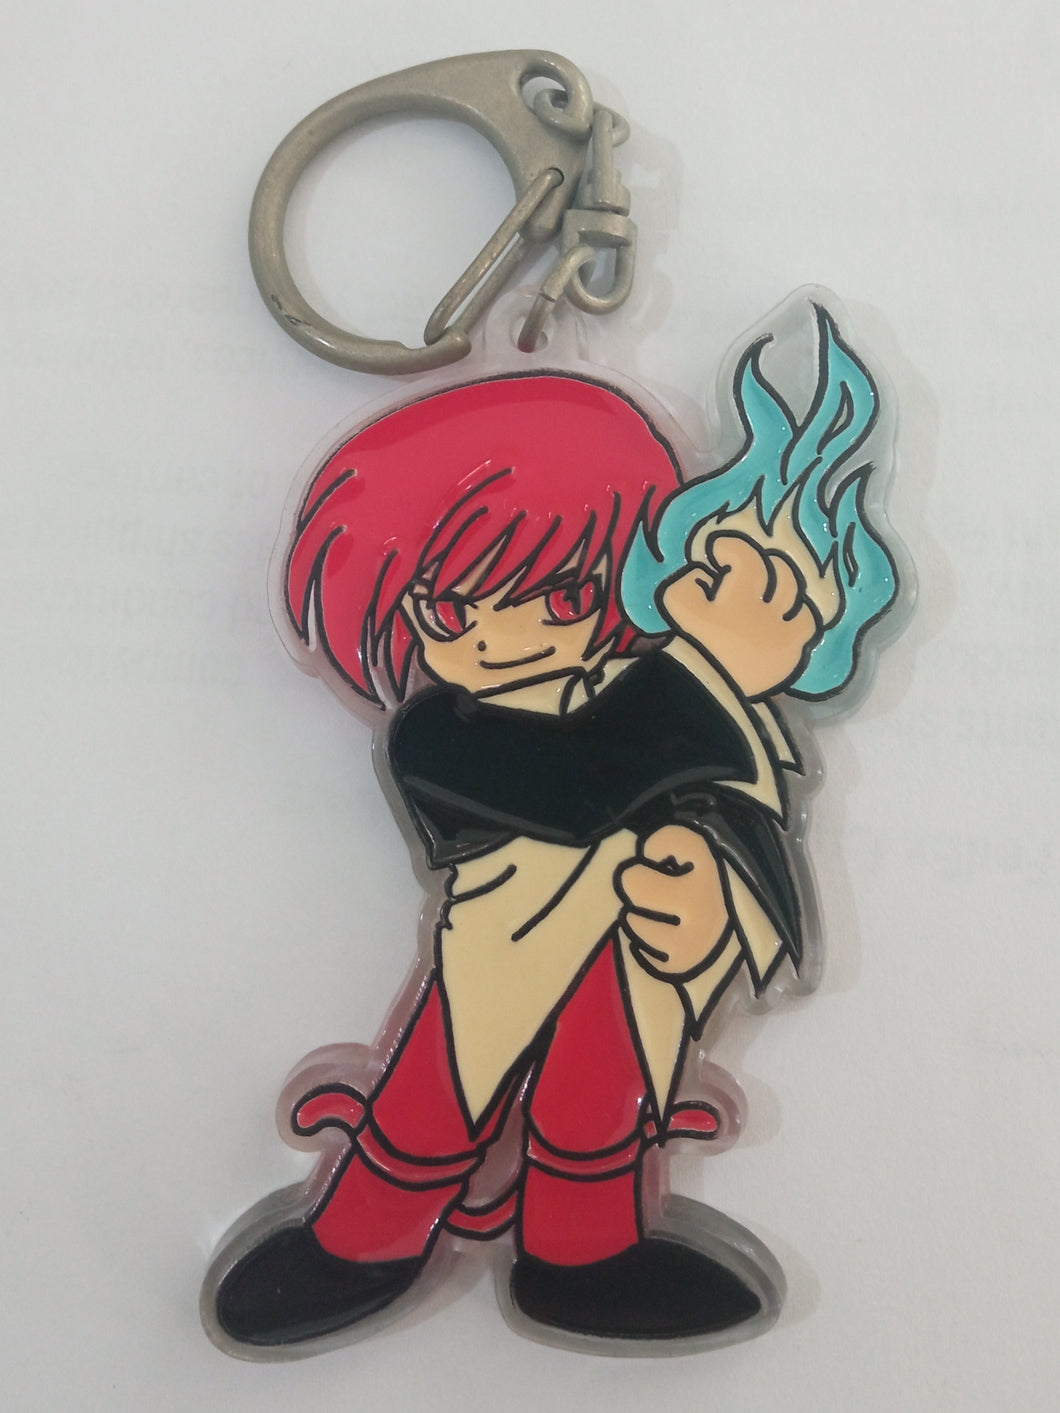 King of Fighters IORI YAGAMI Vintage Acrylic Keychain Mascot Key Holder Strap Rare 1996 SNK